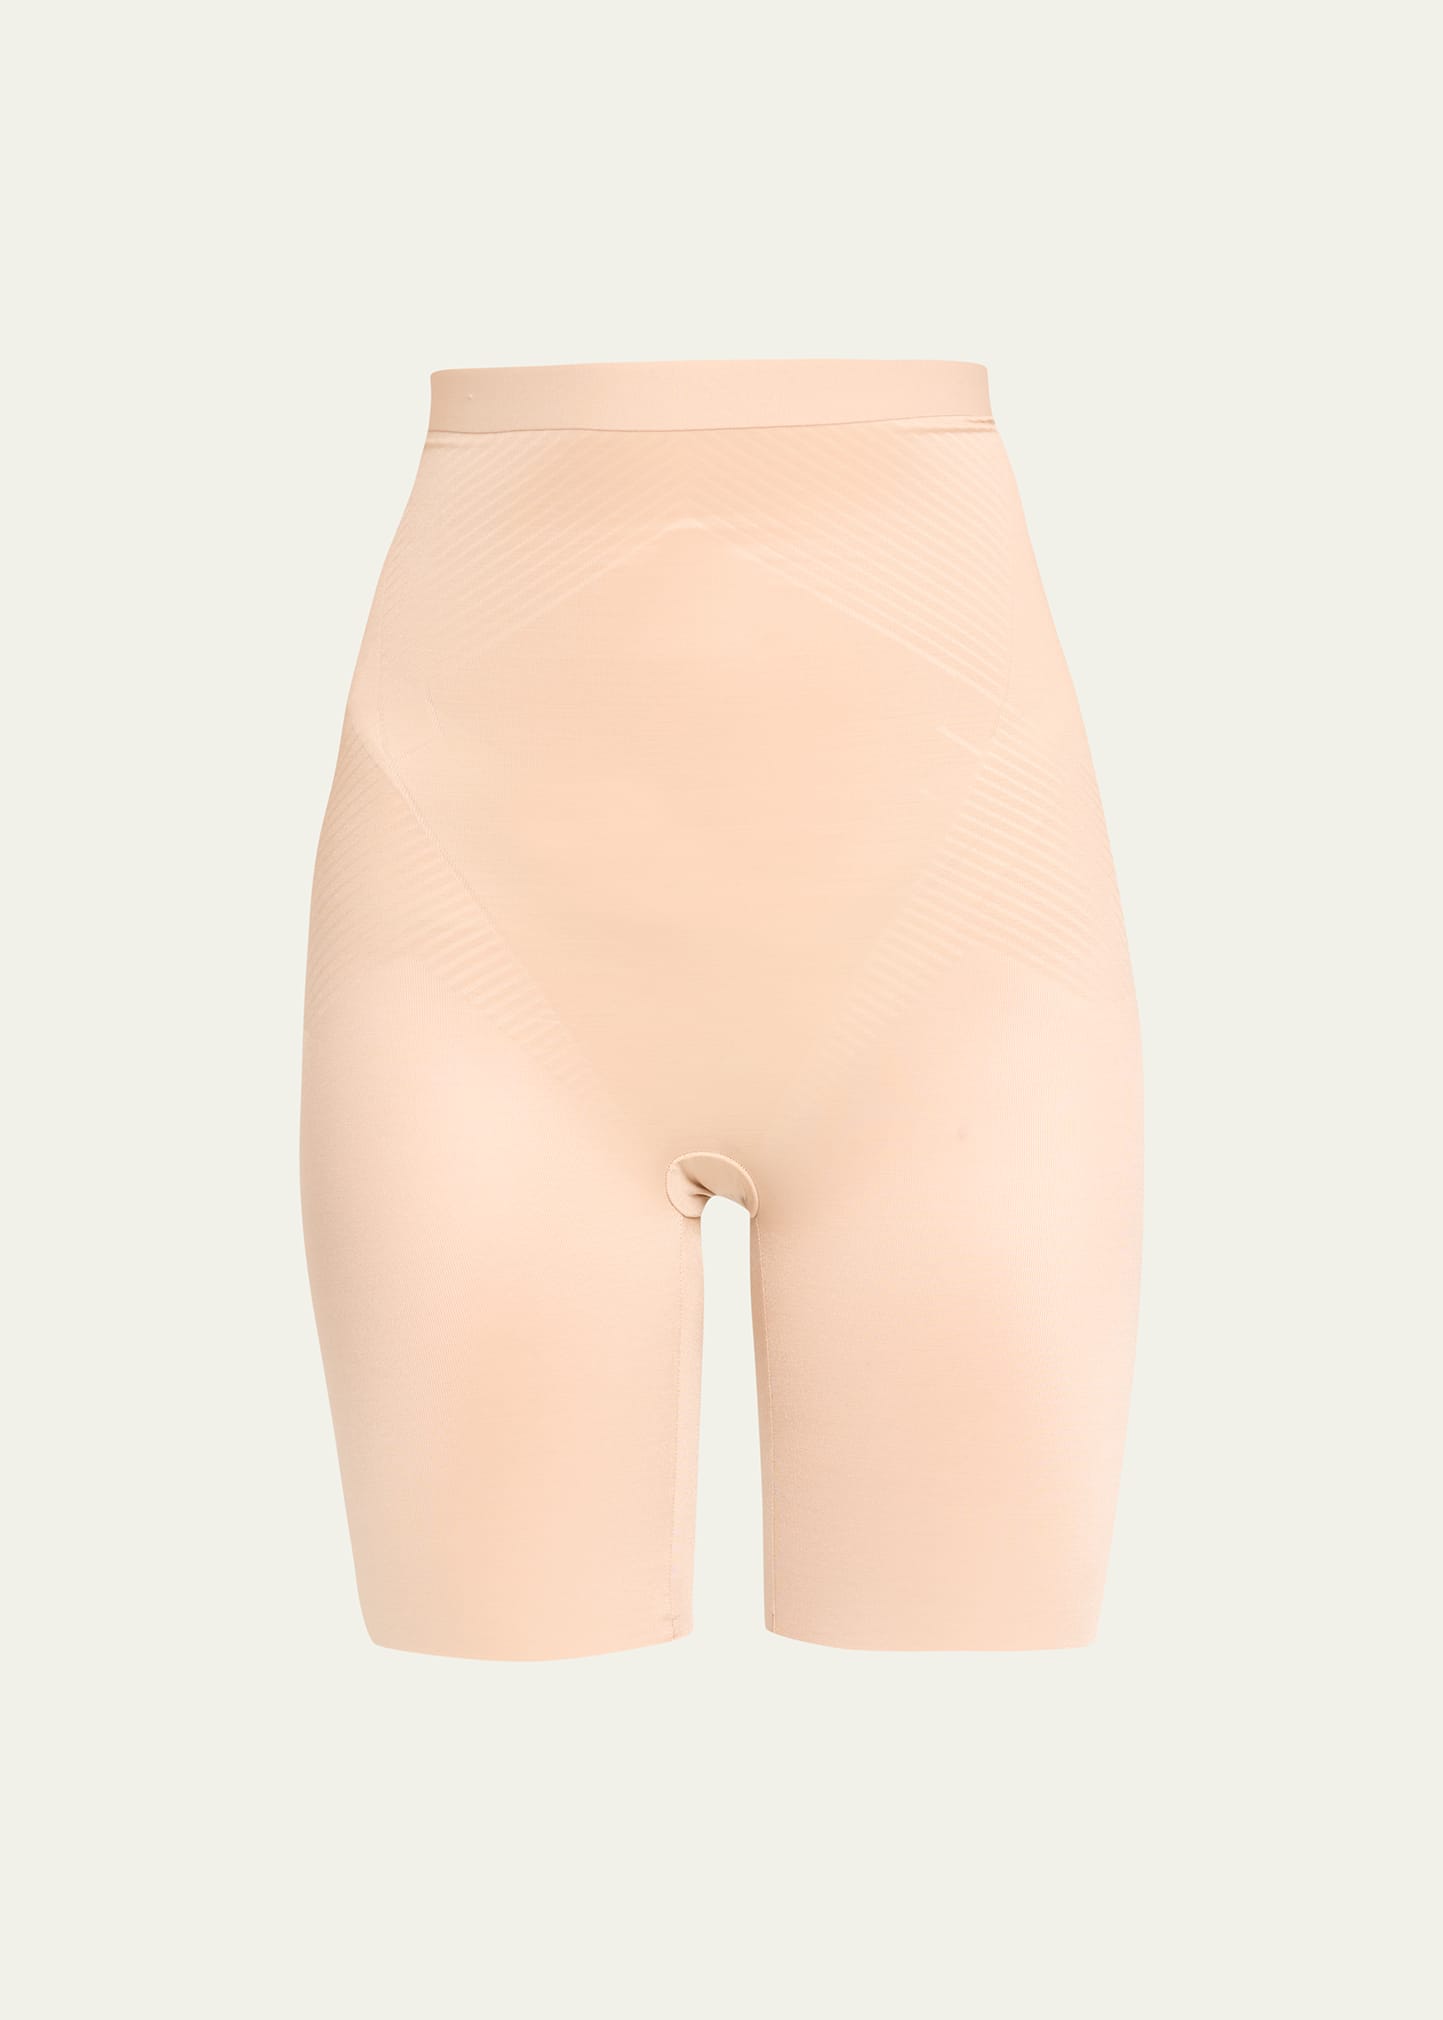 Spanx Thinstincts 2.0 High-Waisted Mid-Thigh Shorts